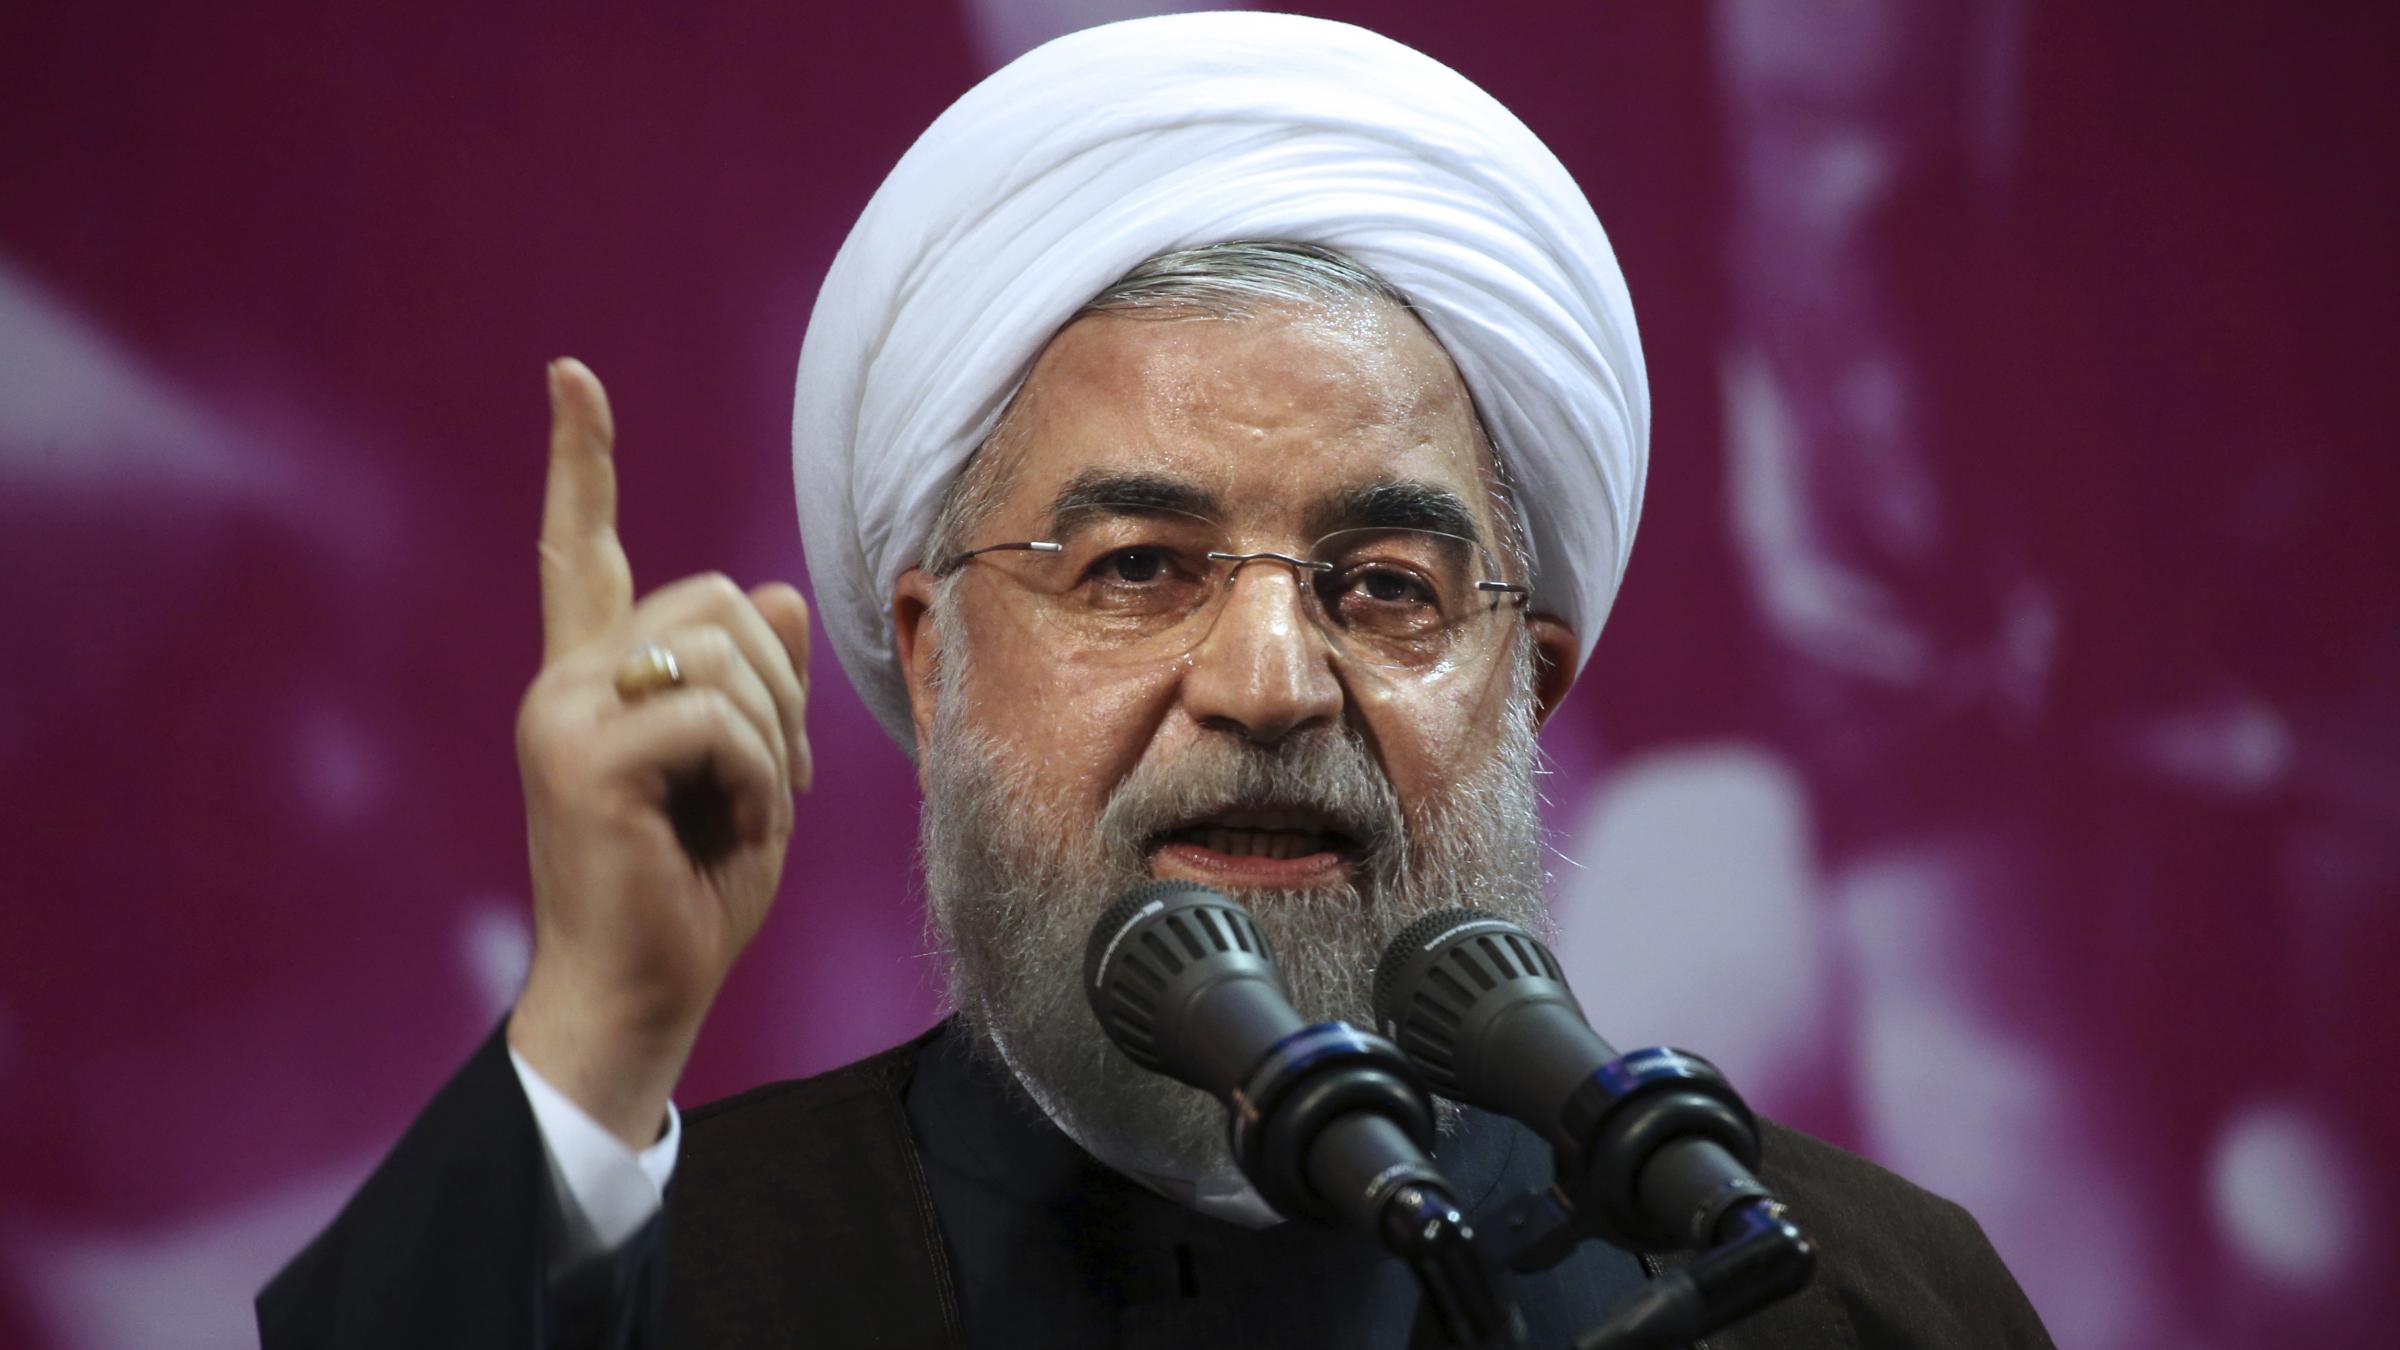 Iran's Hassan Rouhani leads initial count in presidential election - Wiltshire Times